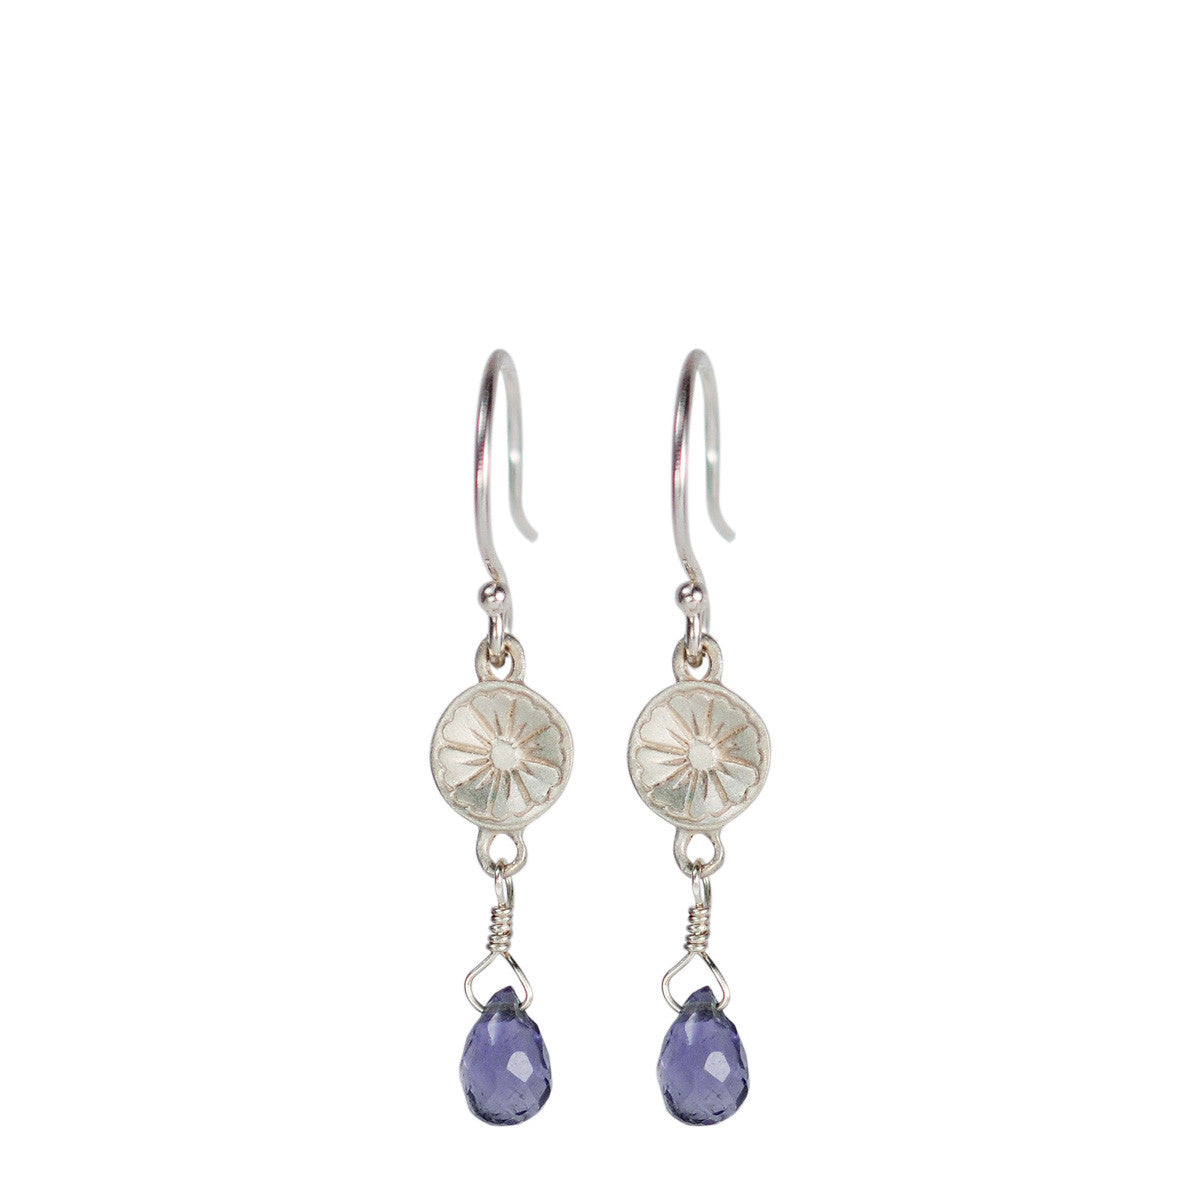 Sterling Silver Small Engraved Flower Earring with Iolite Bead